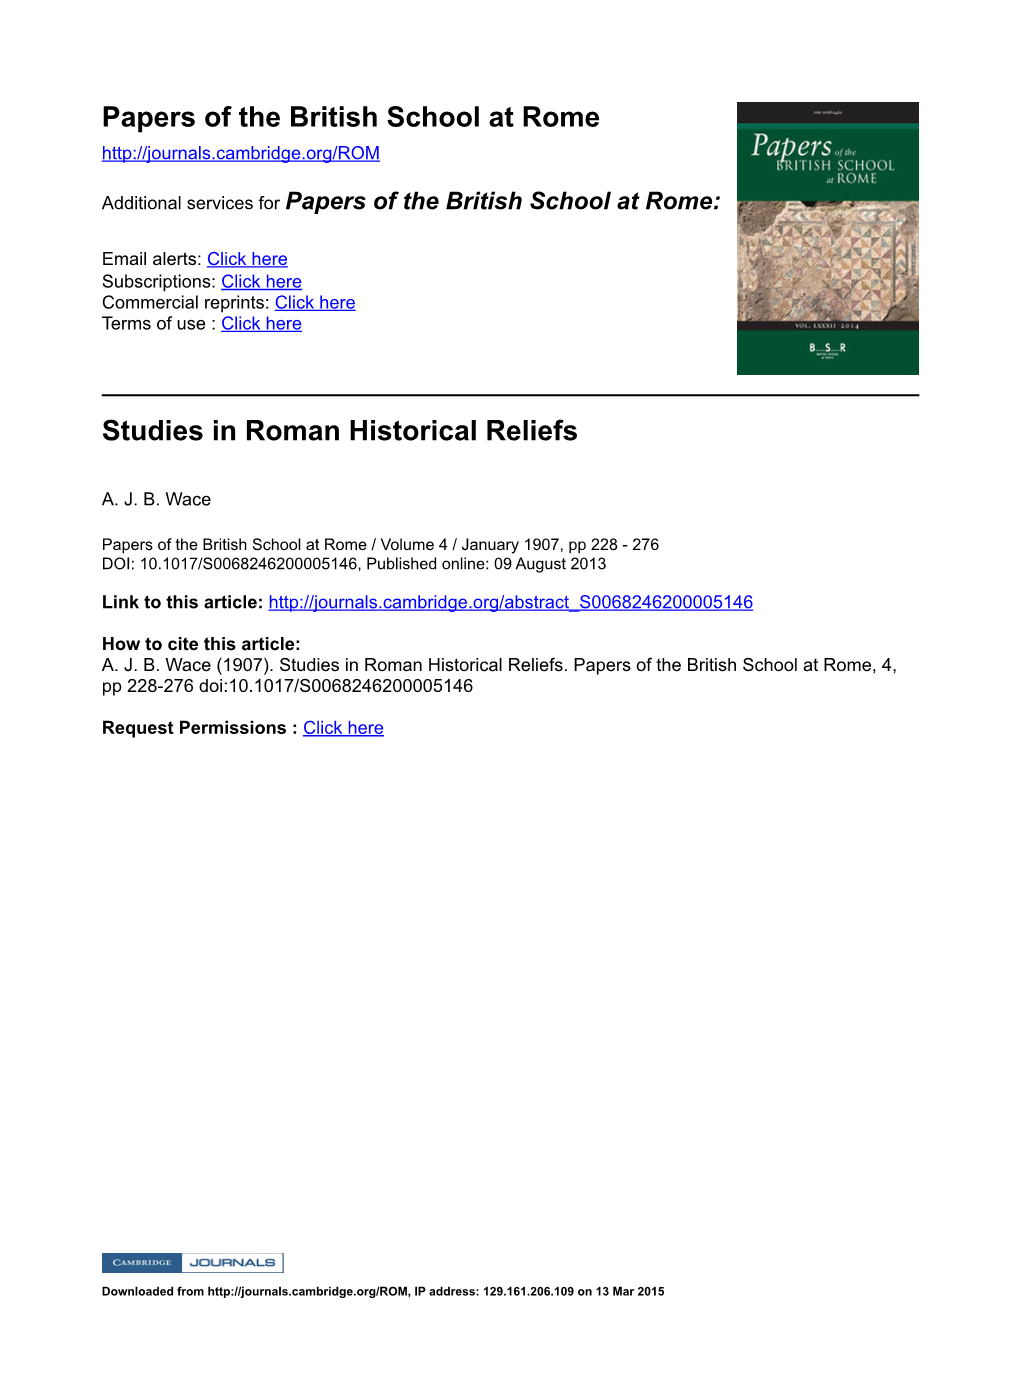 Papers of the British School at Rome Studies in Roman Historical Reliefs